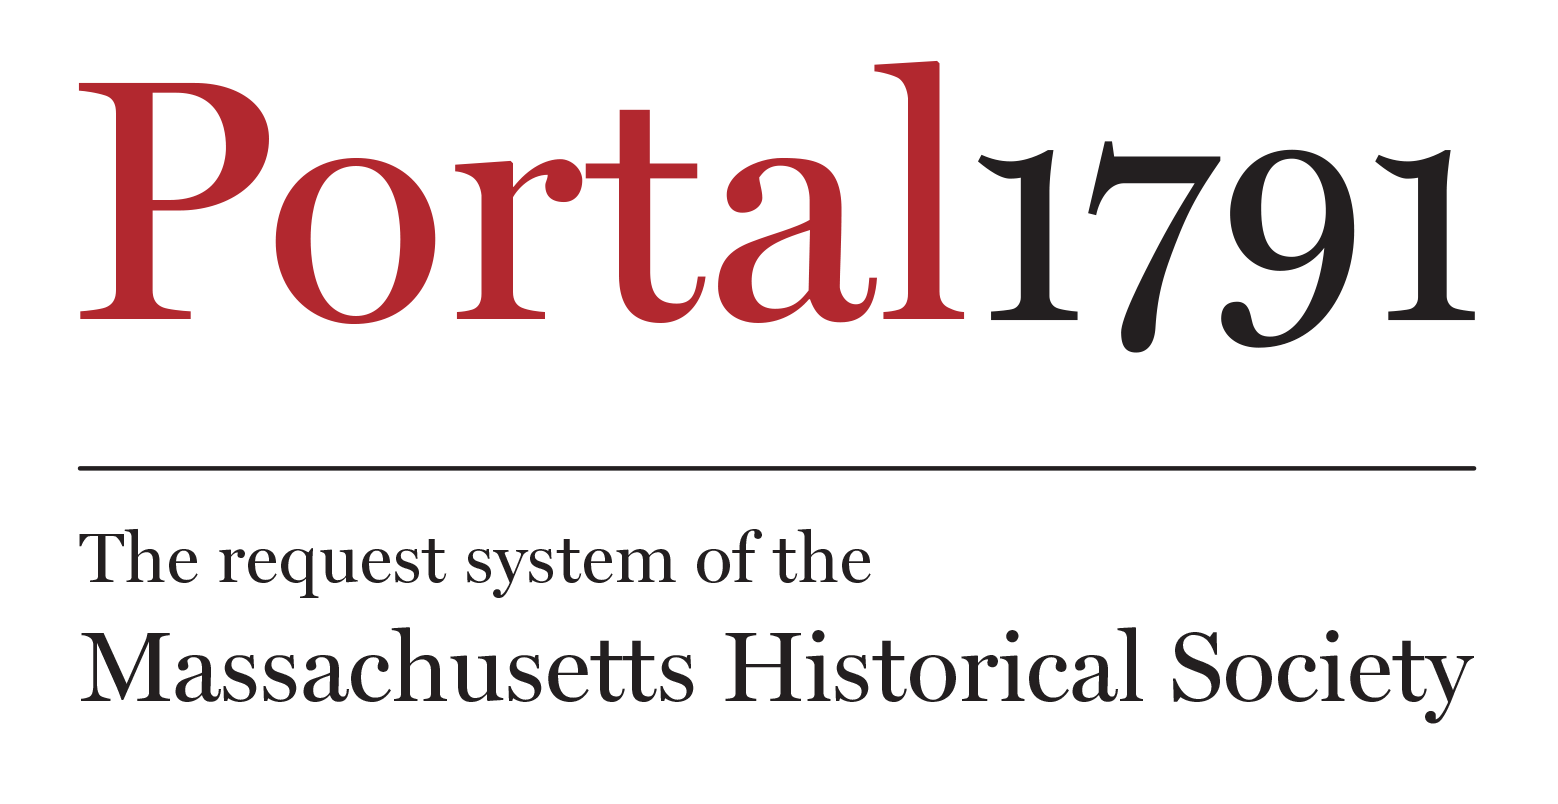 Portal1791 The request system of the Massachusetts Historical Society